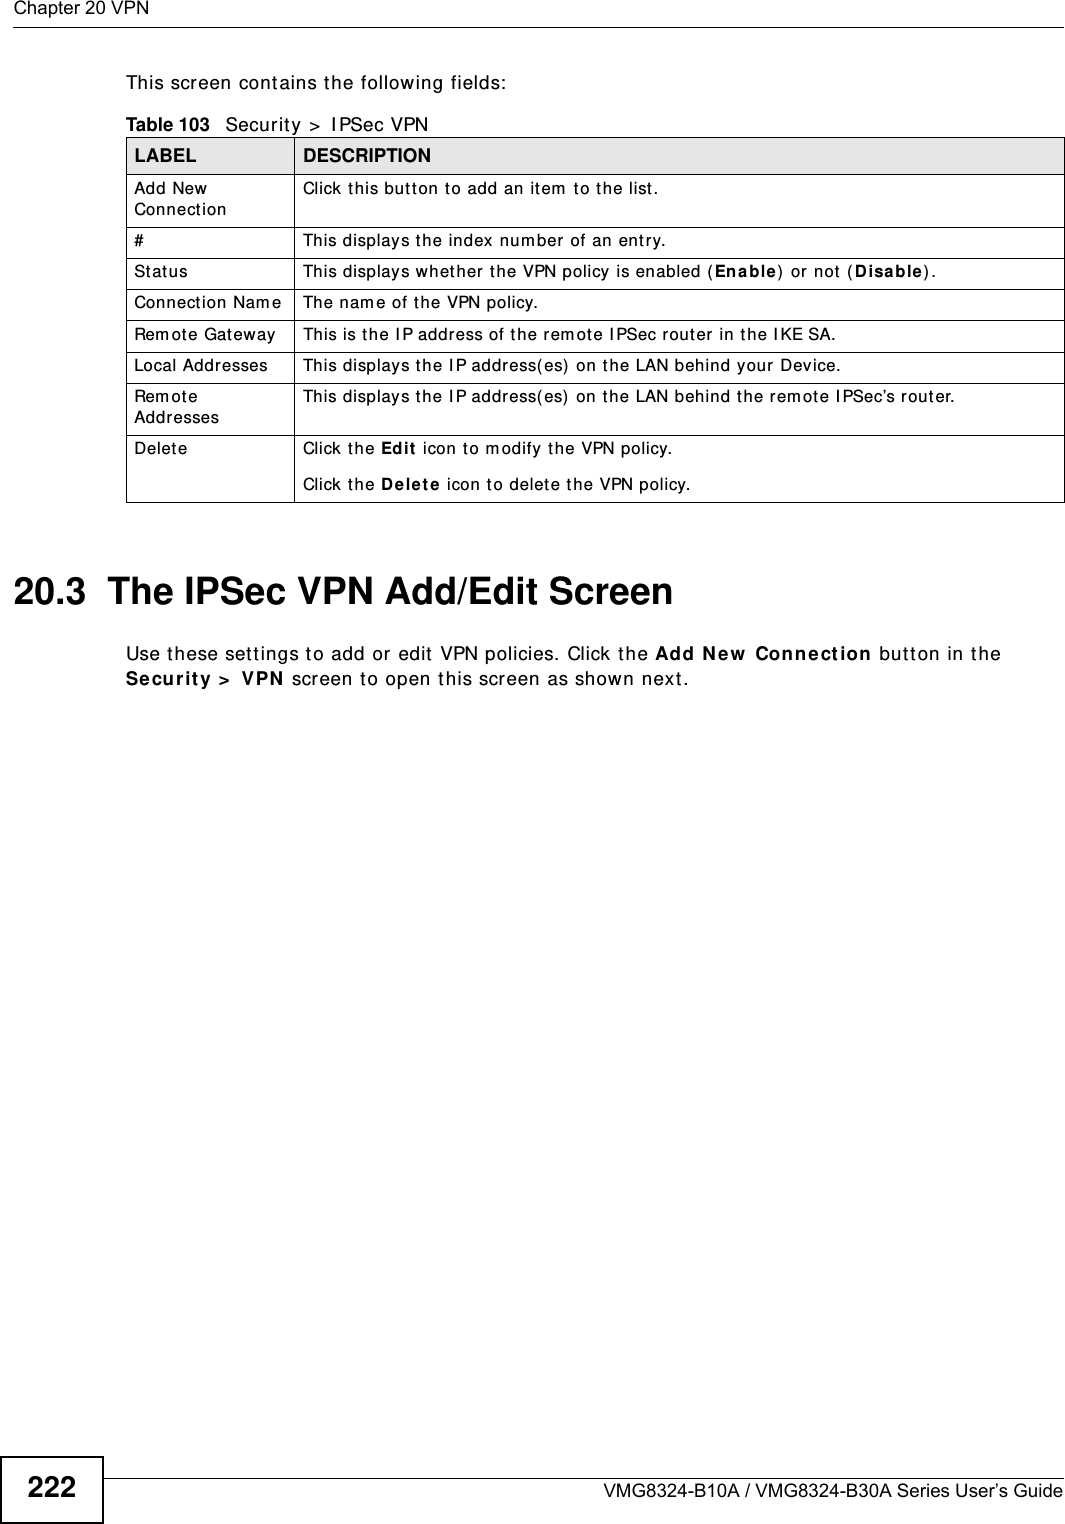 Chapter 20 VPNVMG8324-B10A / VMG8324-B30A Series User’s Guide222This screen cont ains t he following fields:20.3  The IPSec VPN Add/Edit ScreenUse t hese sett ings to add or edit VPN policies. Click the Add Ne w  Conne ct ion butt on in t he Secur it y &gt;  VPN  screen t o open t his screen as shown next .Table 103   Security &gt;  I PSec VPNLABEL DESCRIPTIONAdd New ConnectionClick t his but ton to add an it em  t o the list .# This display s t he index num ber of an entry.St at us This displays whether t he VPN policy is enabled ( Enable) or not ( Disable) .Connection Nam e The nam e of t he VPN policy.Rem ote Gat eway This is t he IP address of the rem ot e I PSec router in the I KE SA.Local Addresses This displays the I P address( es) on t he LAN behind y our Device.Rem ot e AddressesThis displays the I P address( es)  on the LAN behind the rem ote I PSec’s r outer.Delete Click t he Edit  icon t o m odify t he VPN policy.Click t he D e let e icon to delet e the VPN policy.